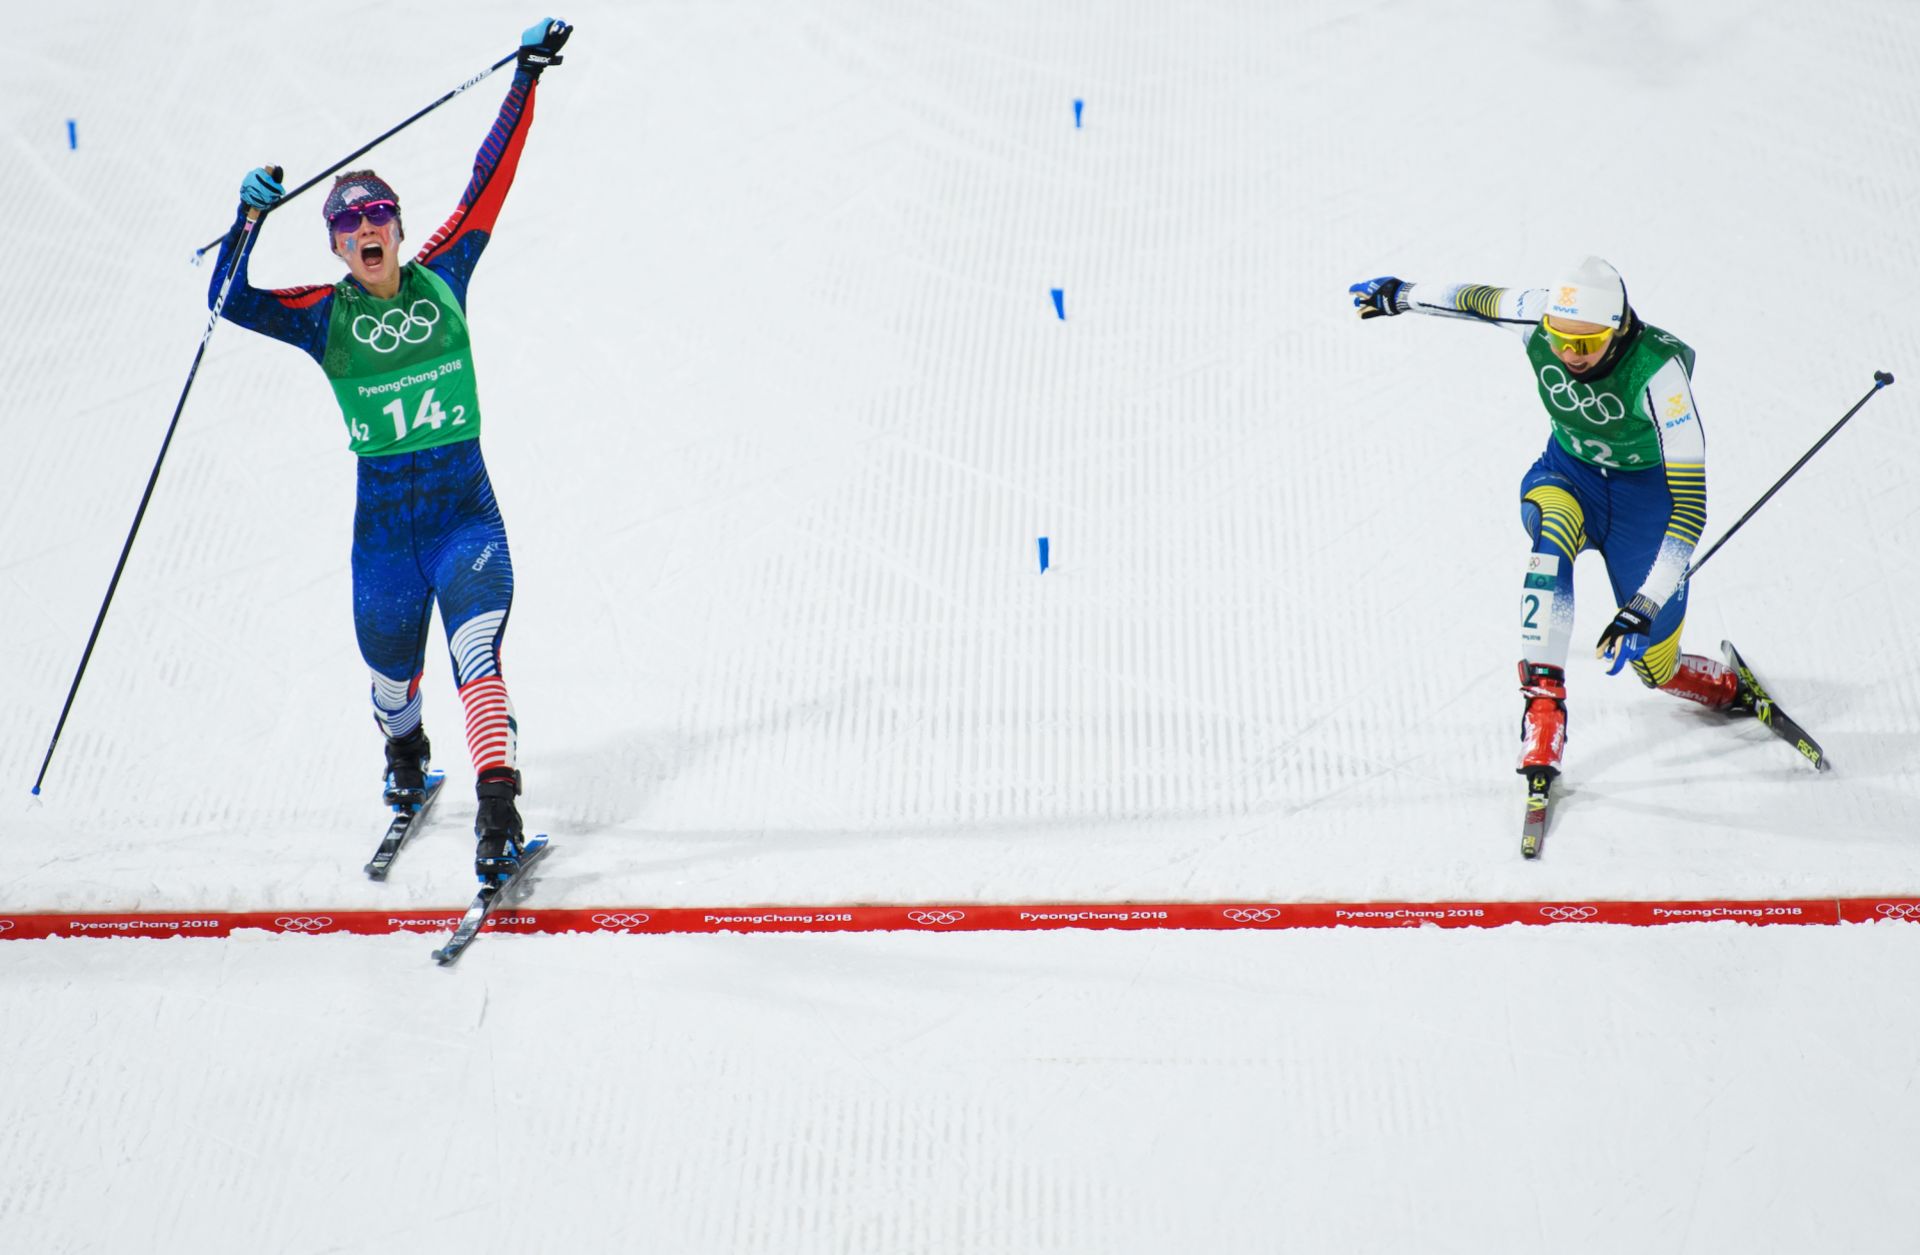 U.S. cross-country skier Jessica Diggins (L) crosses the finish line ahead of Swedish skier Stina Nilsson to win gold in the sprint event at the Winter Olympics in Pyeongchang, South Korea.